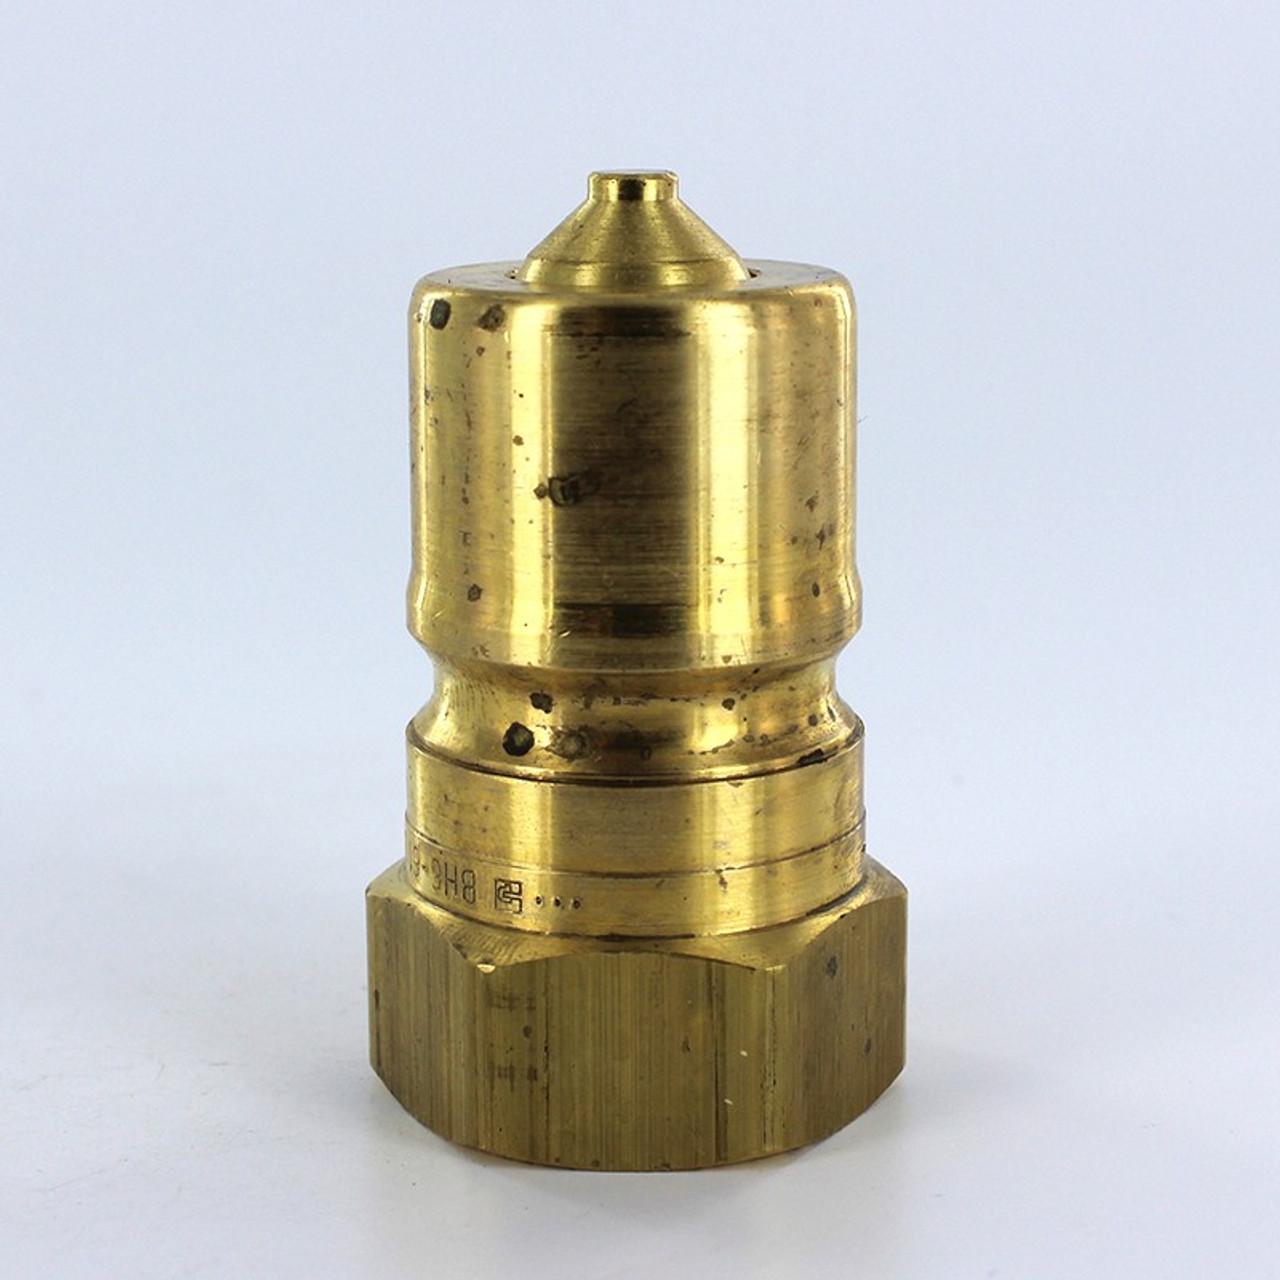 Parker Bh6-61 60 Series Nipple Brass 3/4" Body Size 1/8" Npt Female Port Poppet-Type Valve General Purpose 27.4" Hg Vacuum-1000Psi (69Bar) Wp Nitrile Seals Temp Range Degrees F: (-40 To +250) Conforms To Iso 7241 Series B Standards